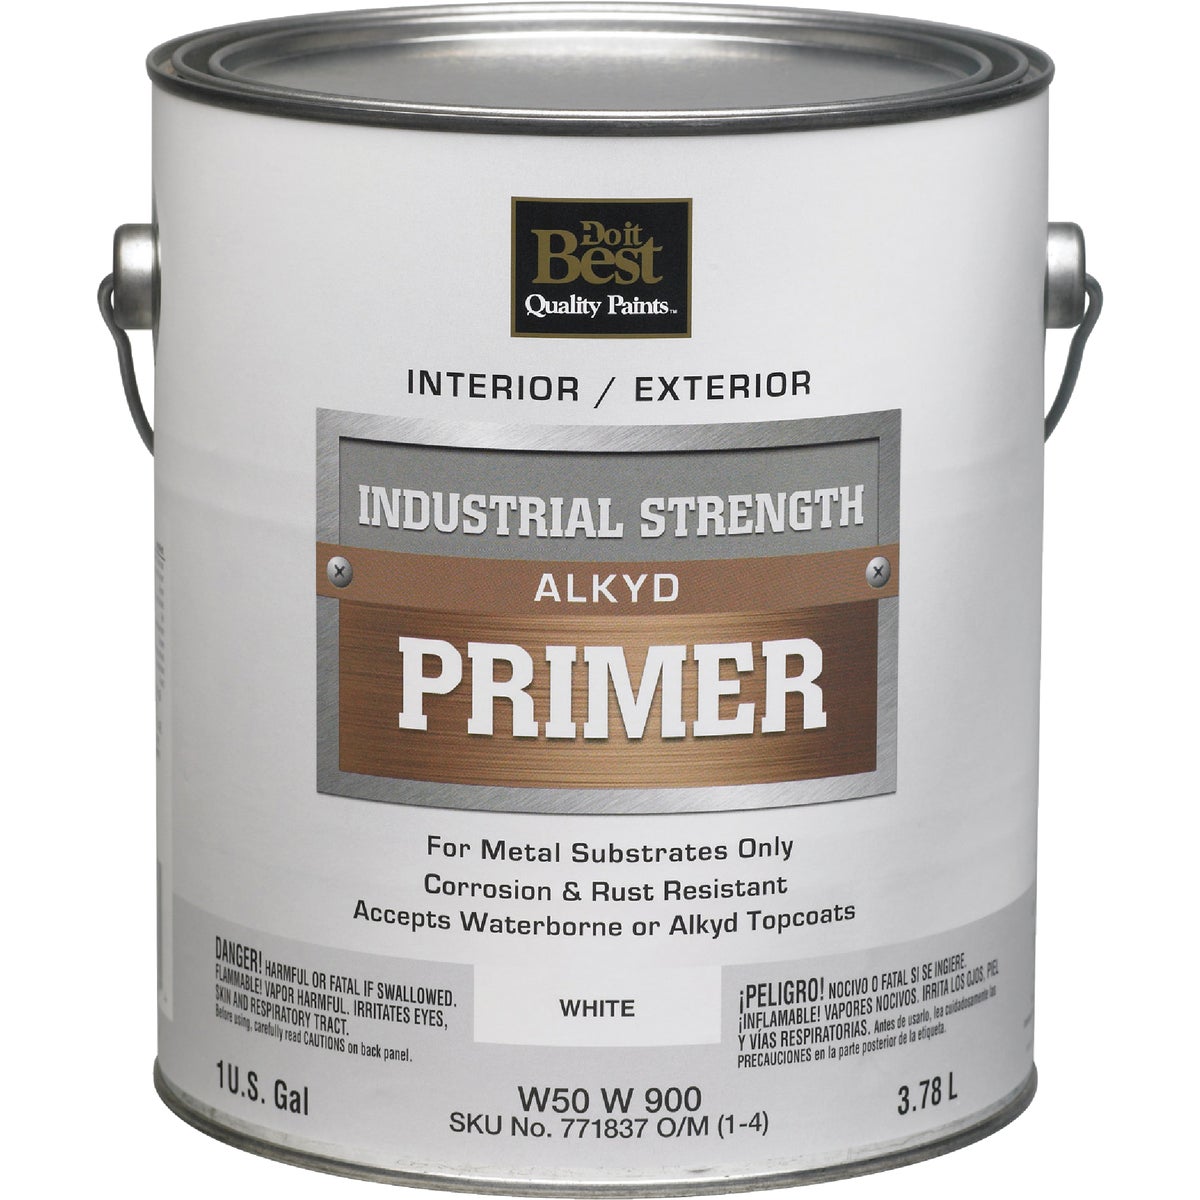 Item 771837, An interior/exterior, corrosion-resistant, alkyd (oil-based) primer for 